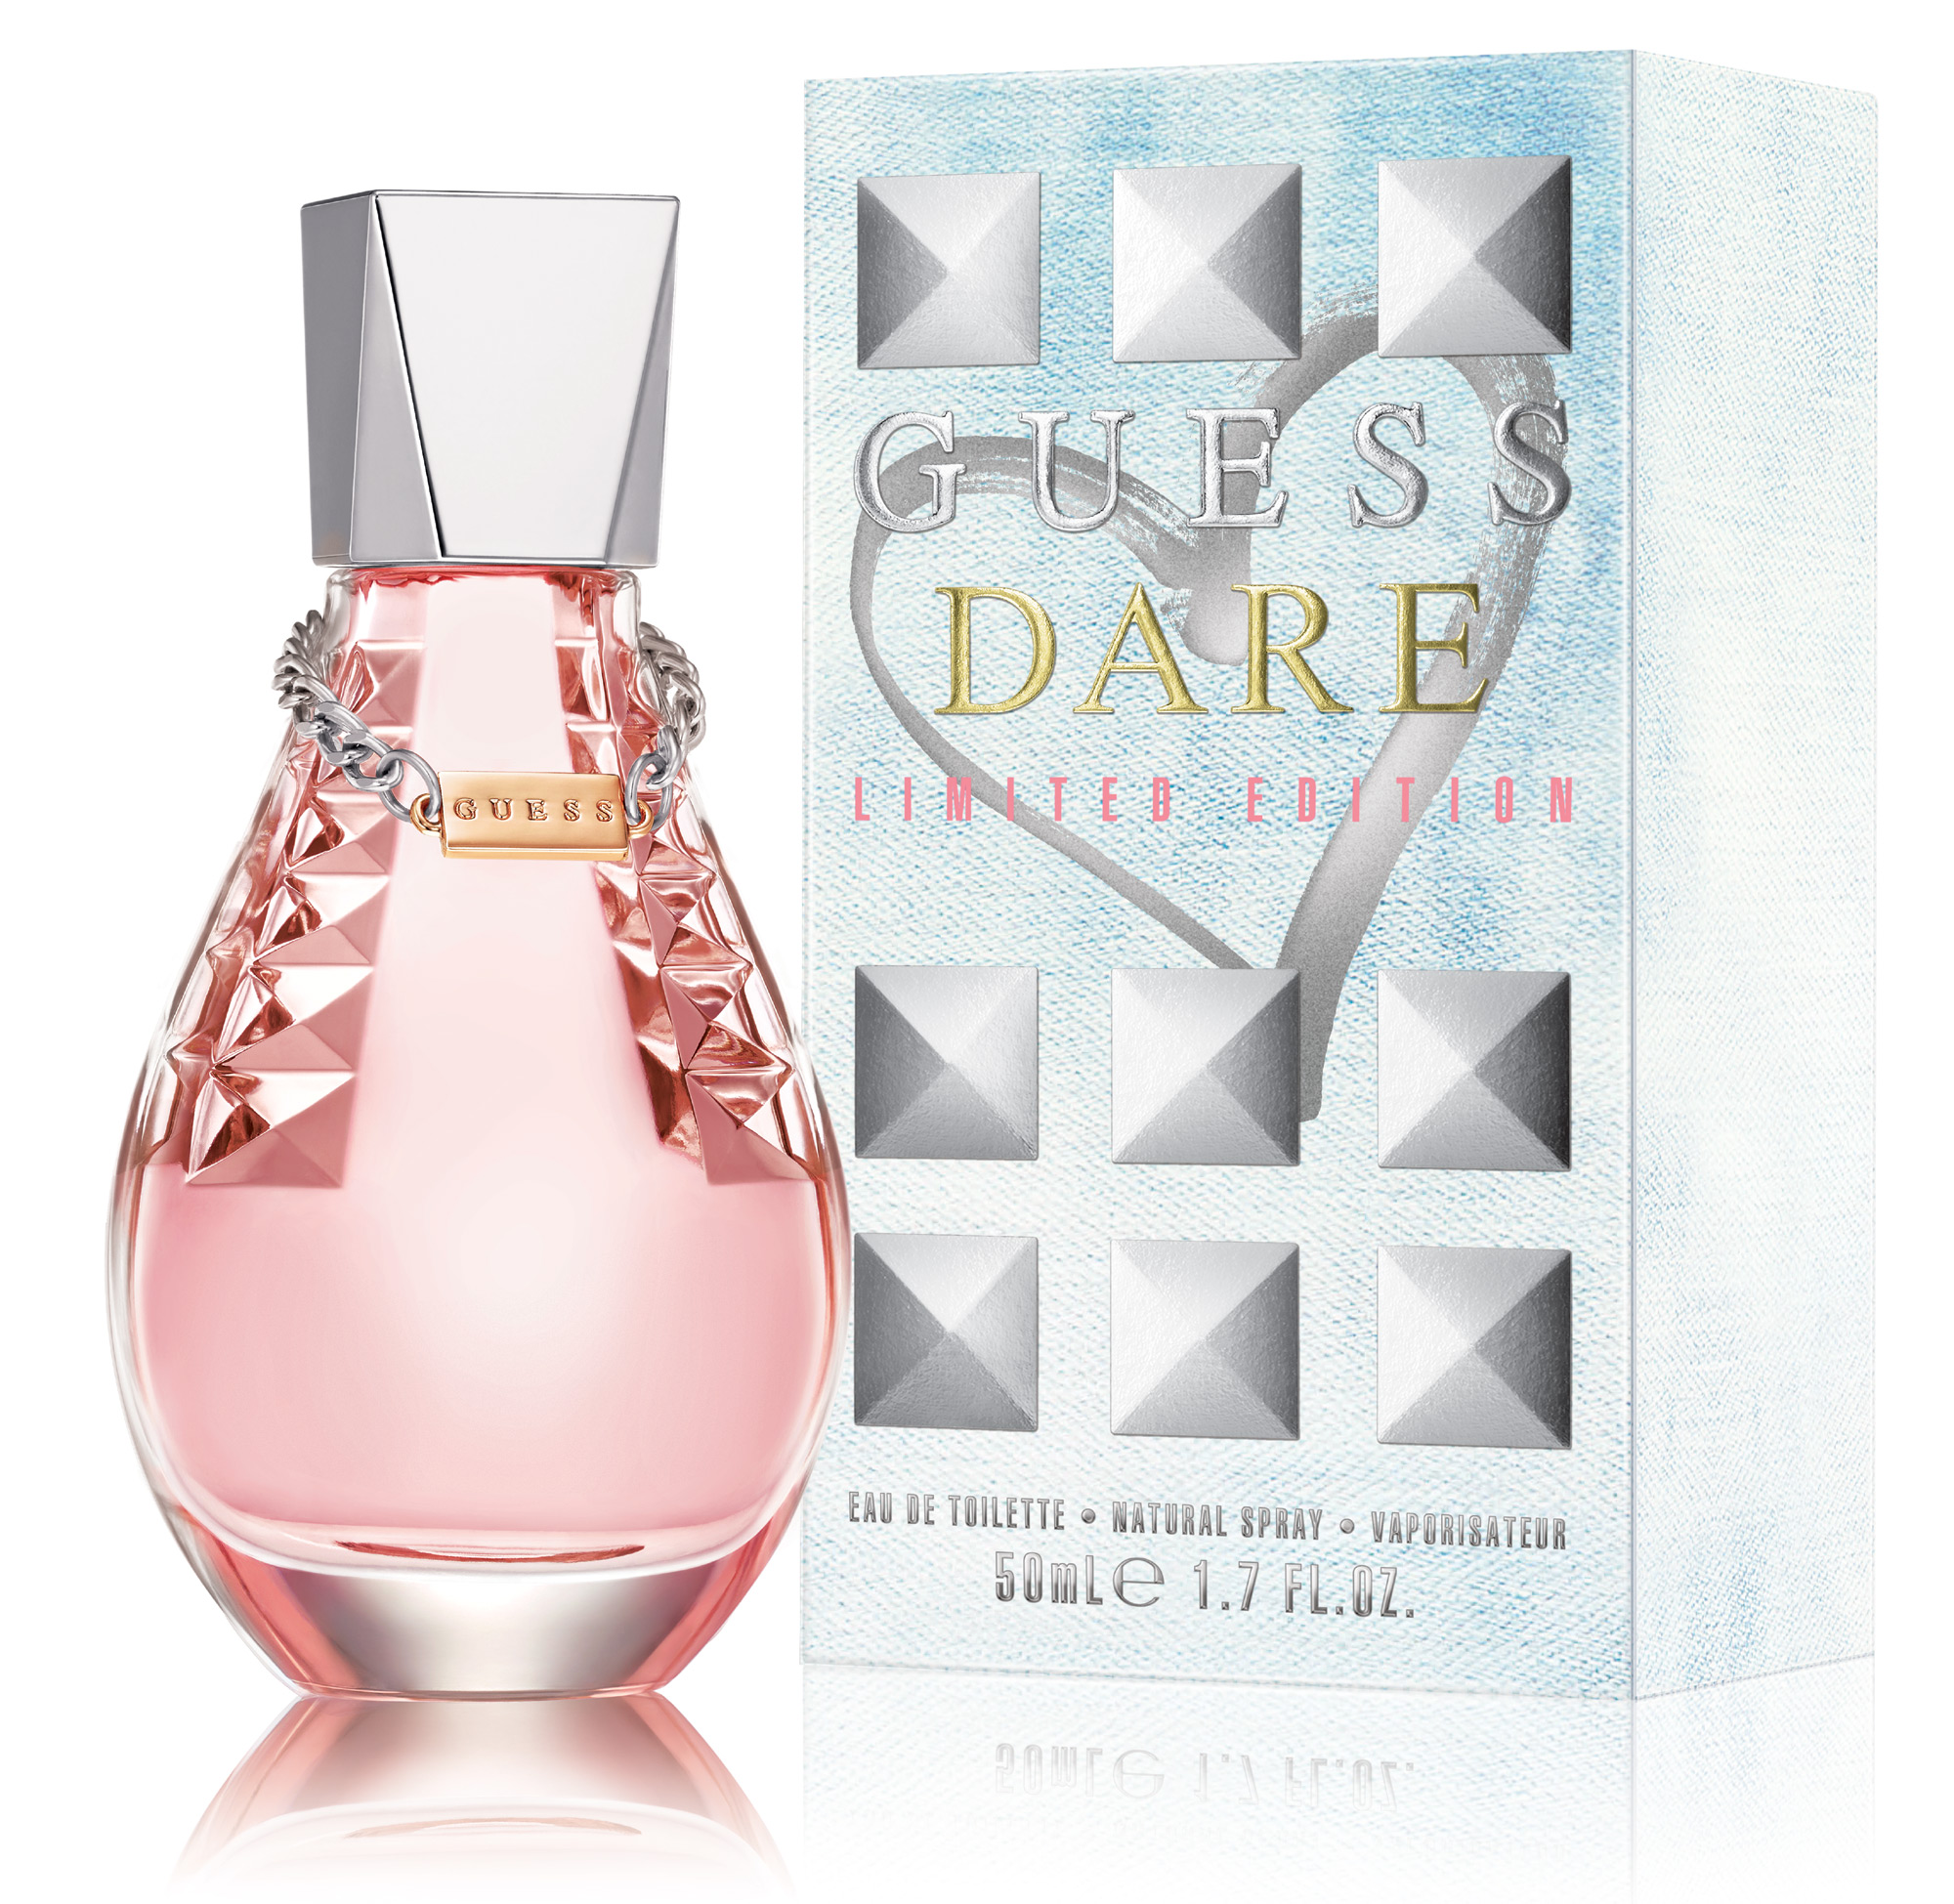 Guess Dare Limited Edition Guess perfume - a new fragrance for women 2015